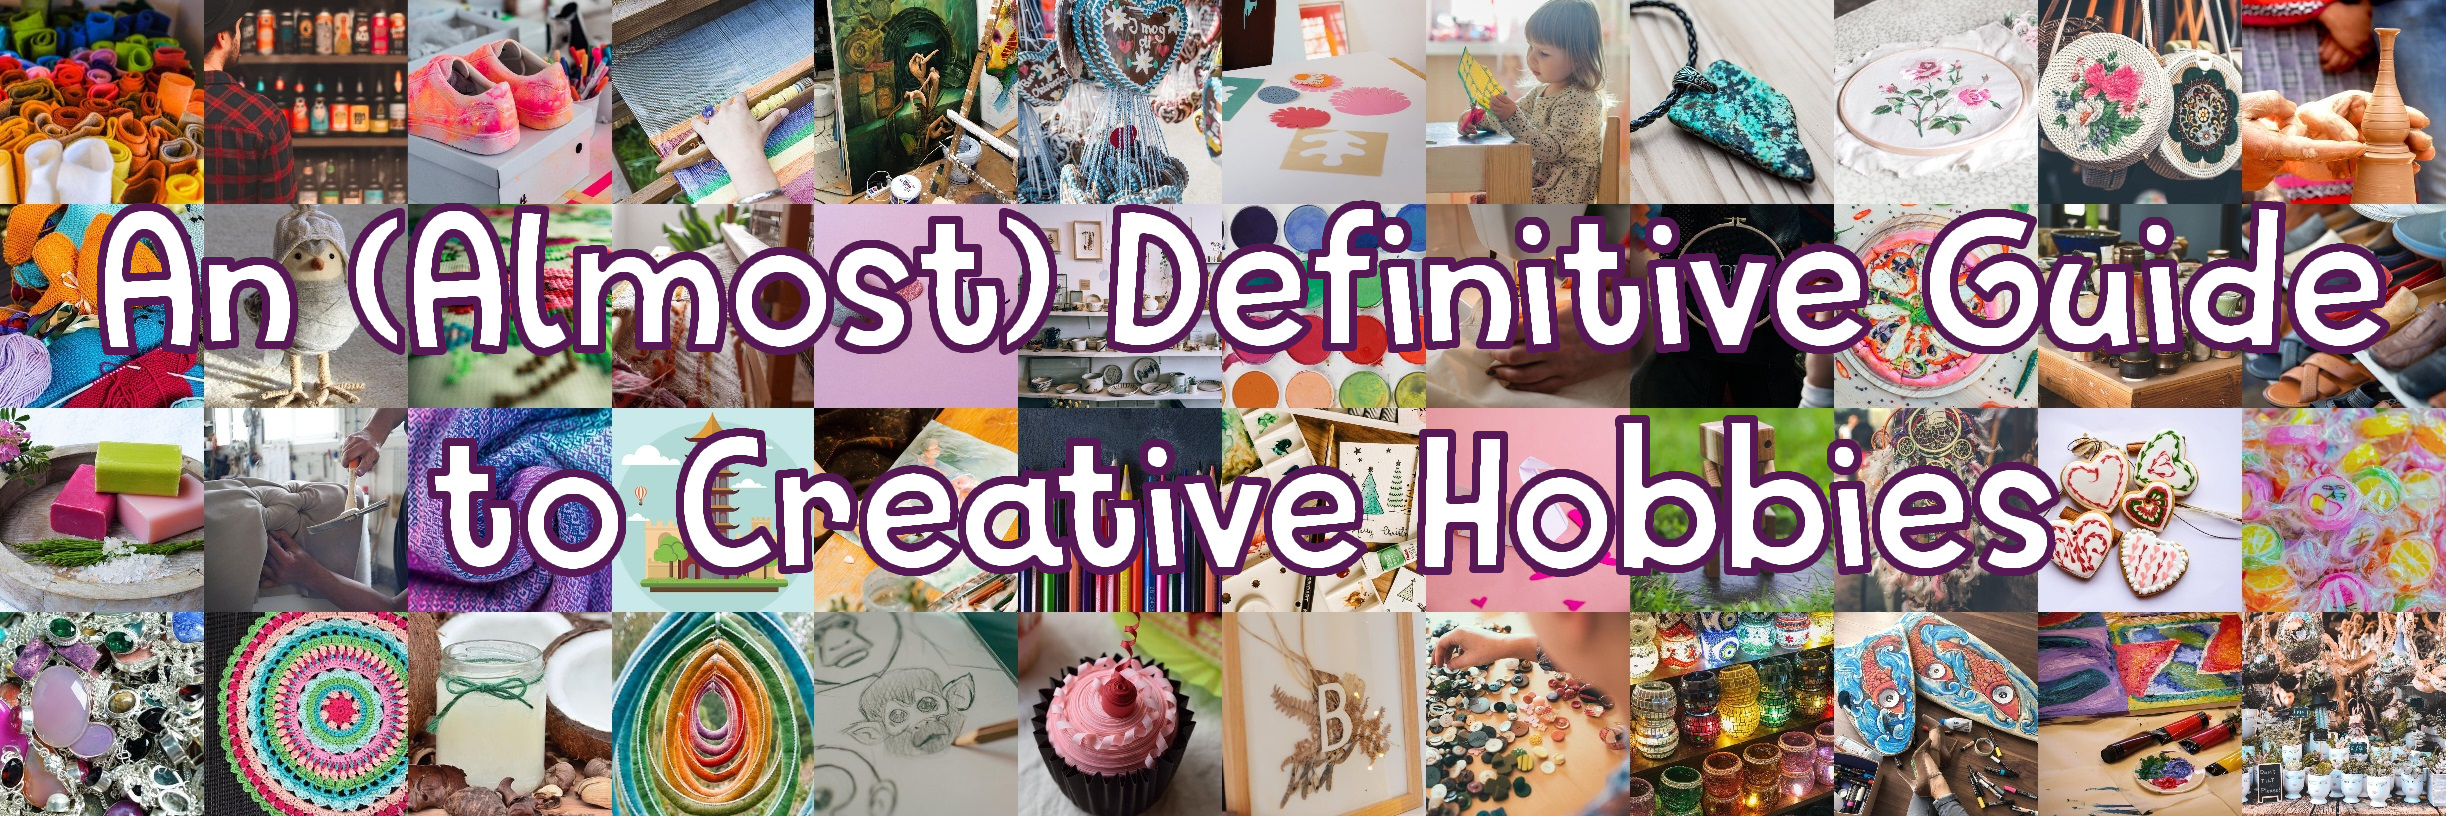 150+ Crafty Hobbies For Absolutely Everyone